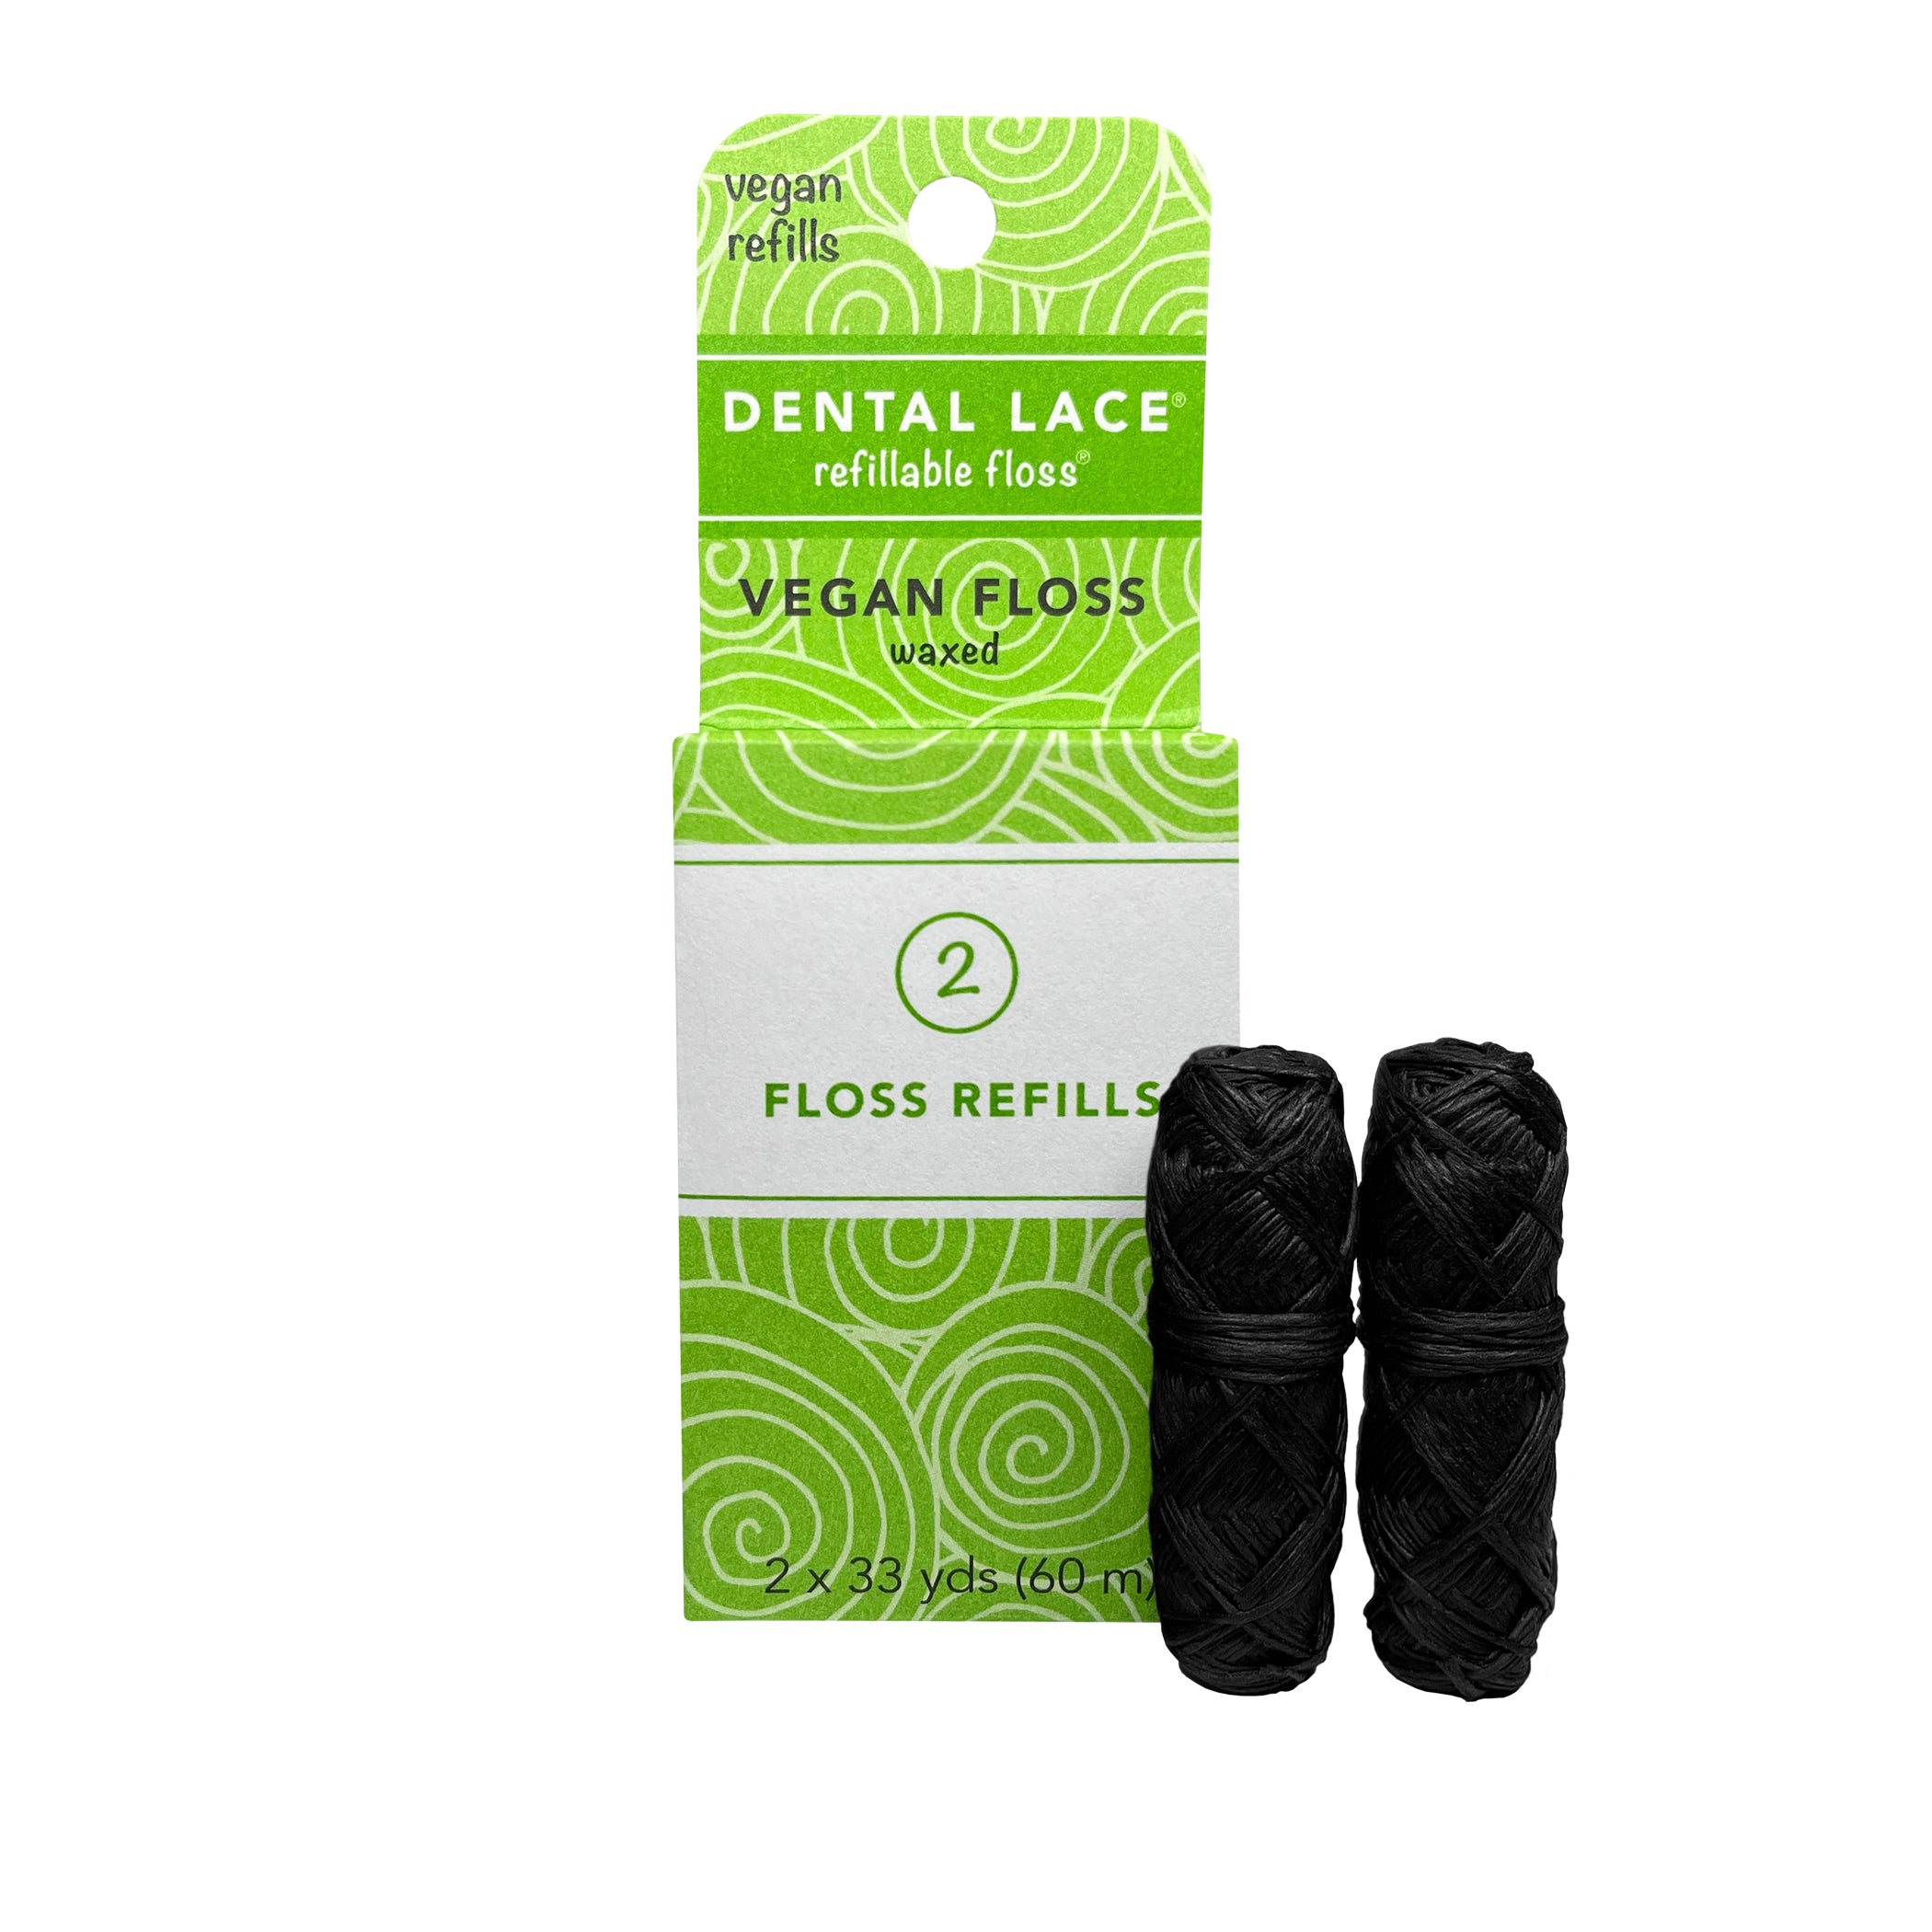 Dental Lace Vegan Bamboo Charcoal Infused Synthetic Floss Refills